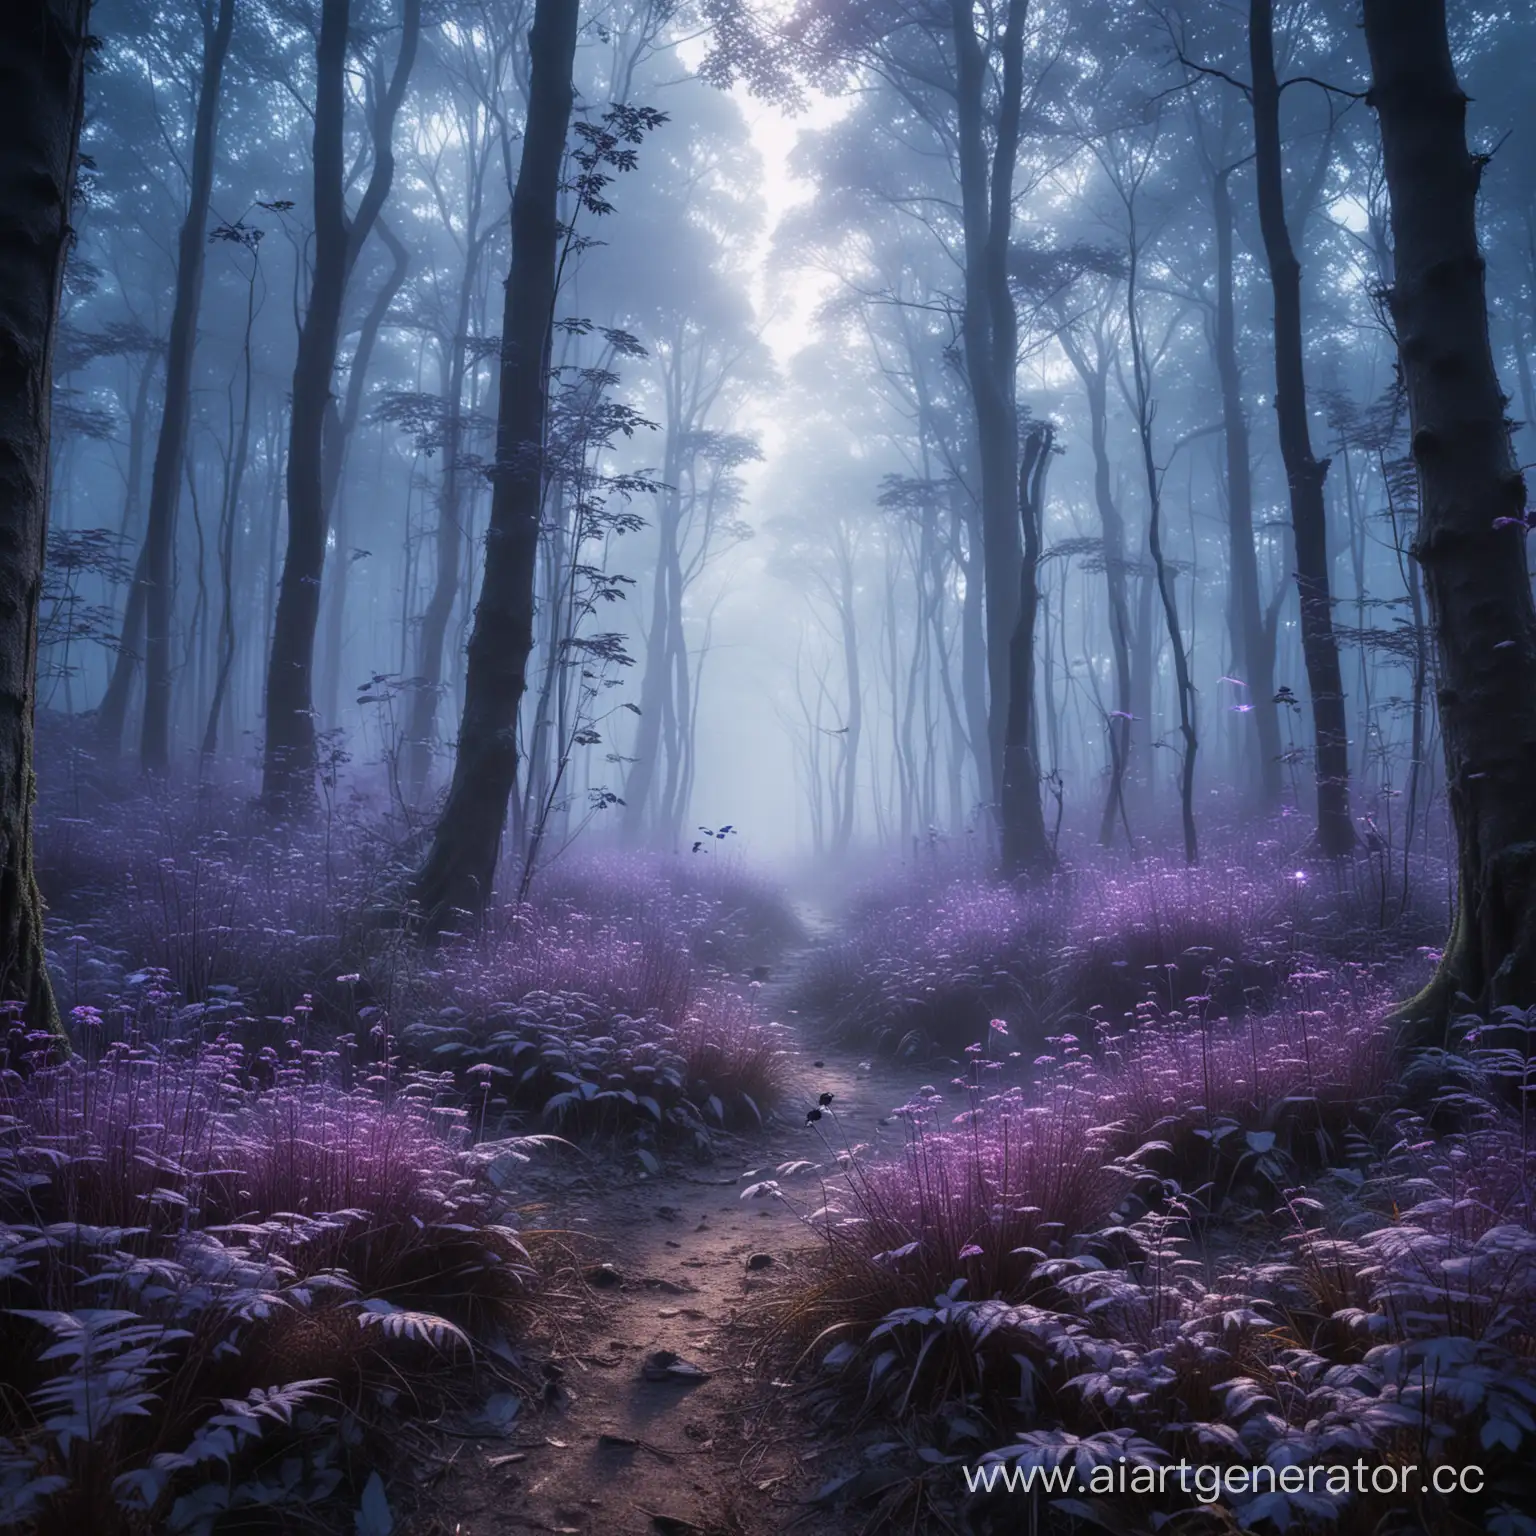 Enchanted-Forest-with-Misty-Haze-and-Glowing-Insects